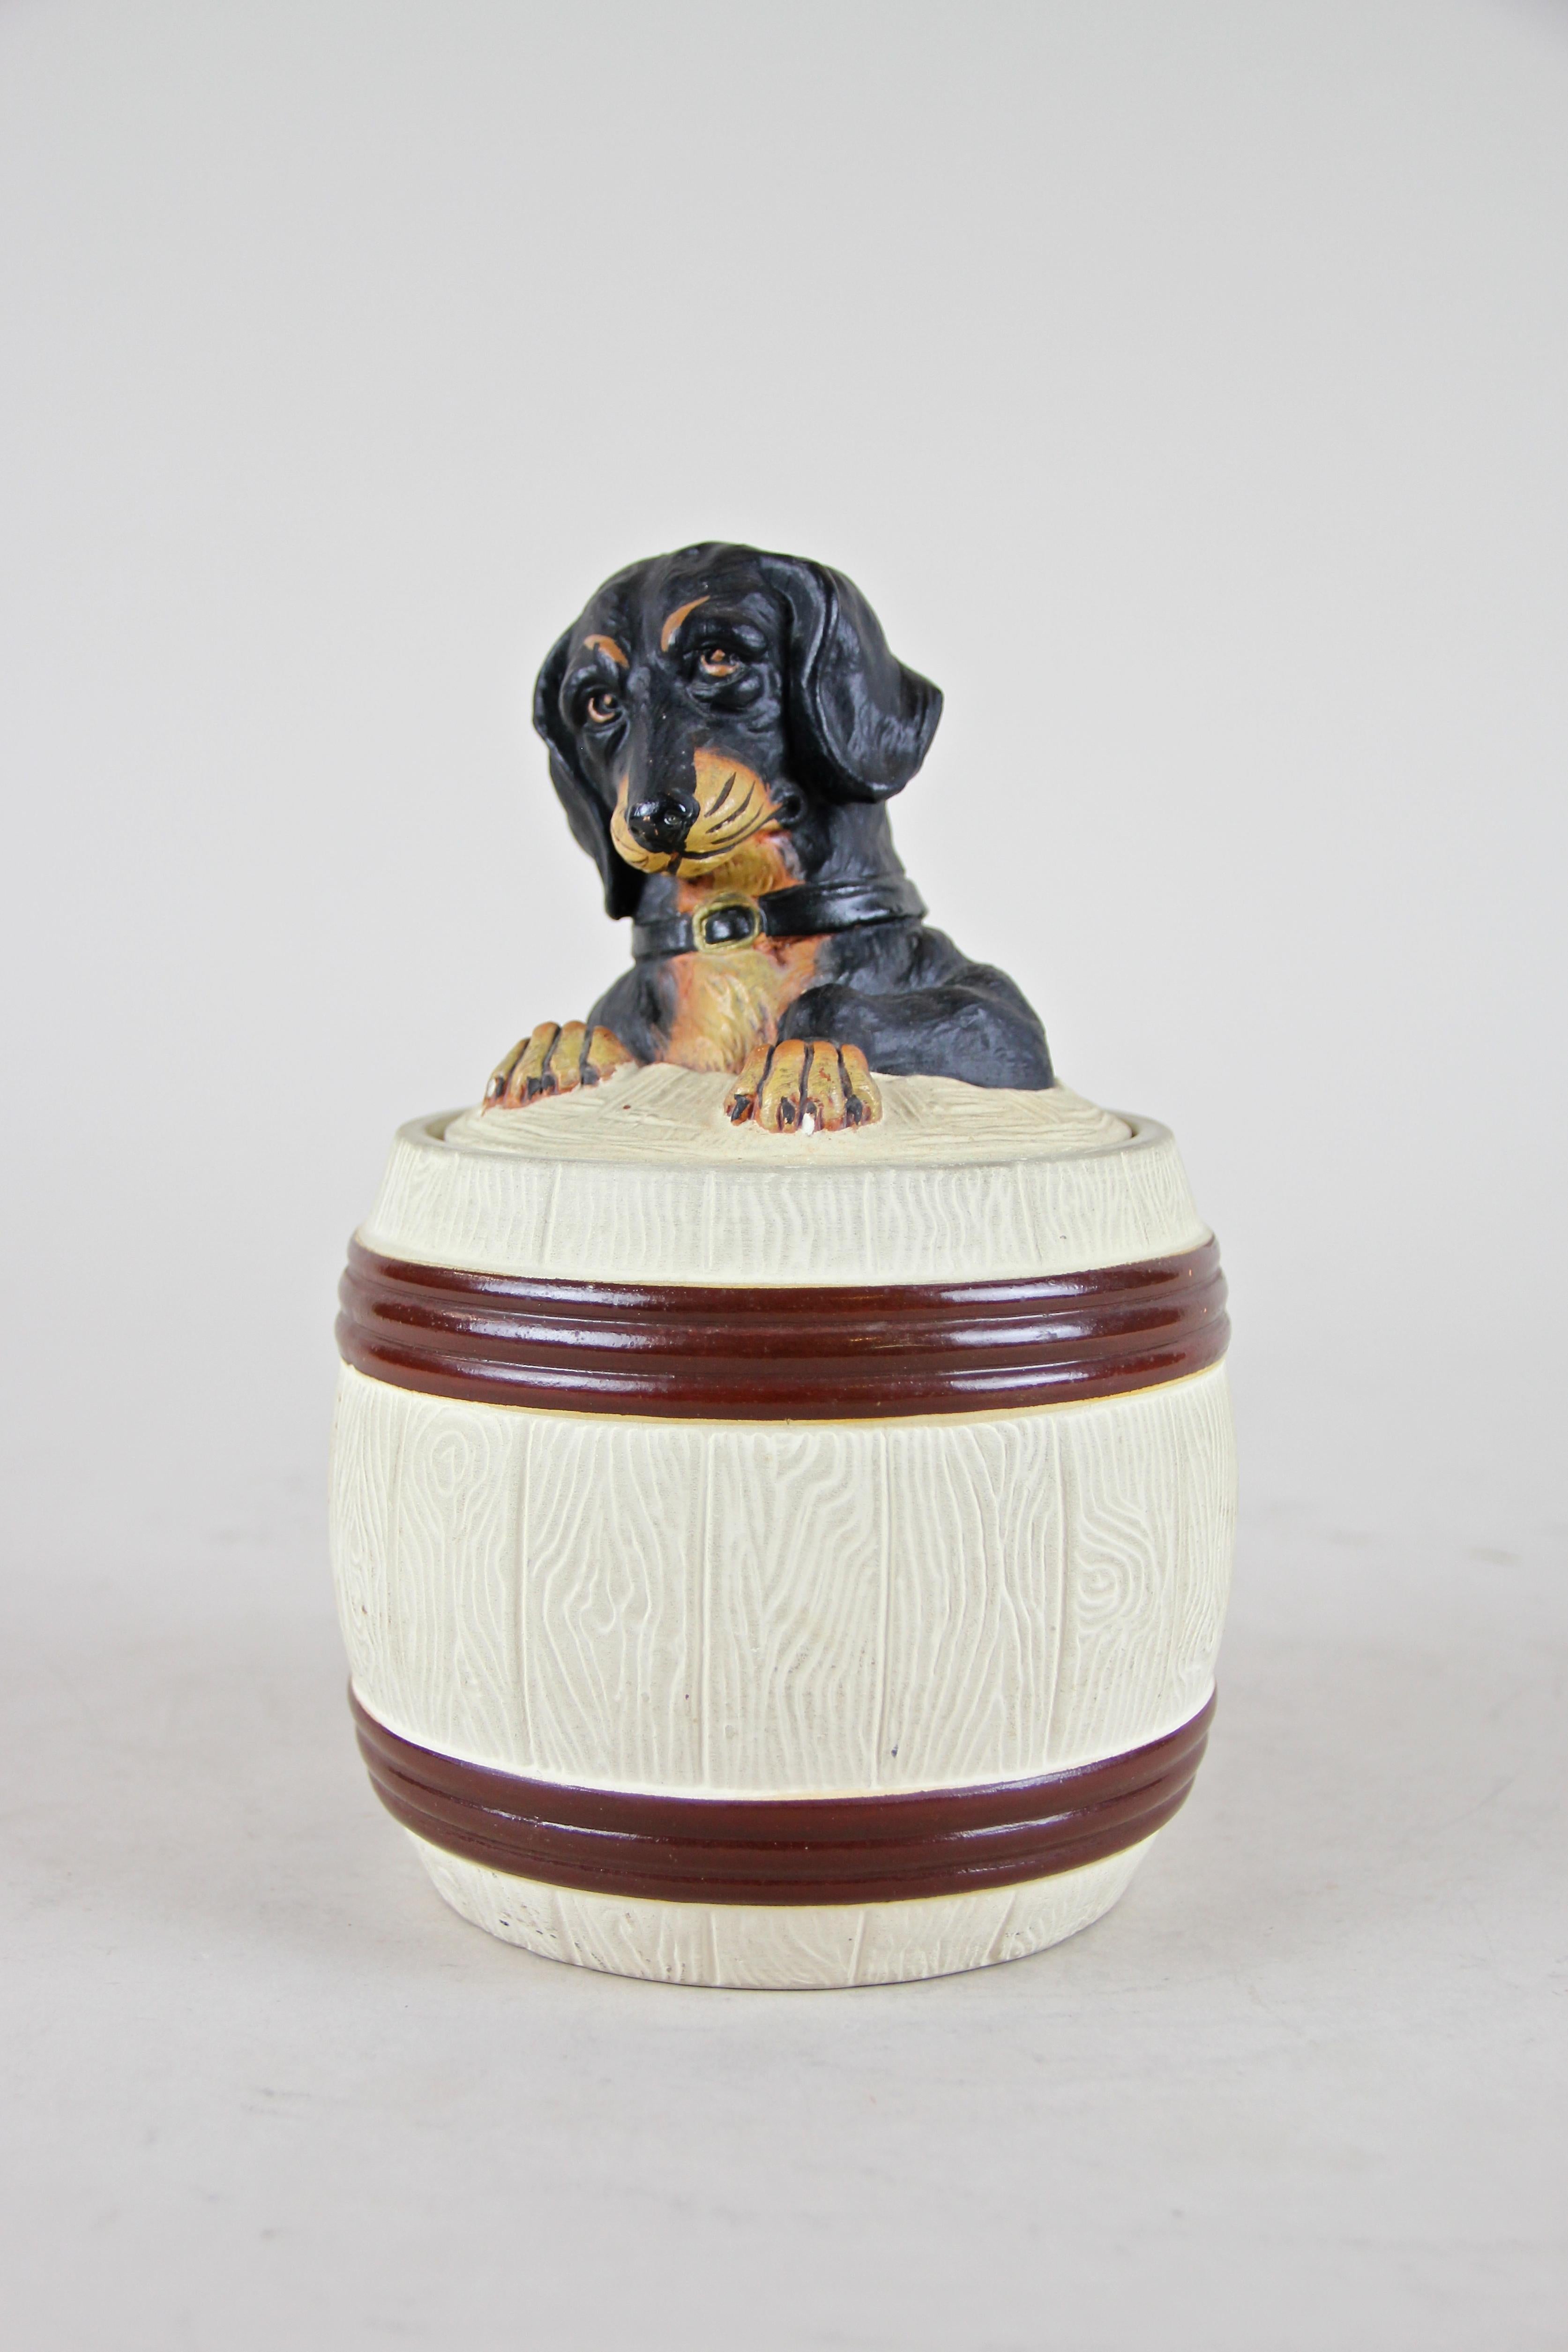 We are offering another rare Johann Maresch item, an exceptional Majolica tobacco box out of the famous 